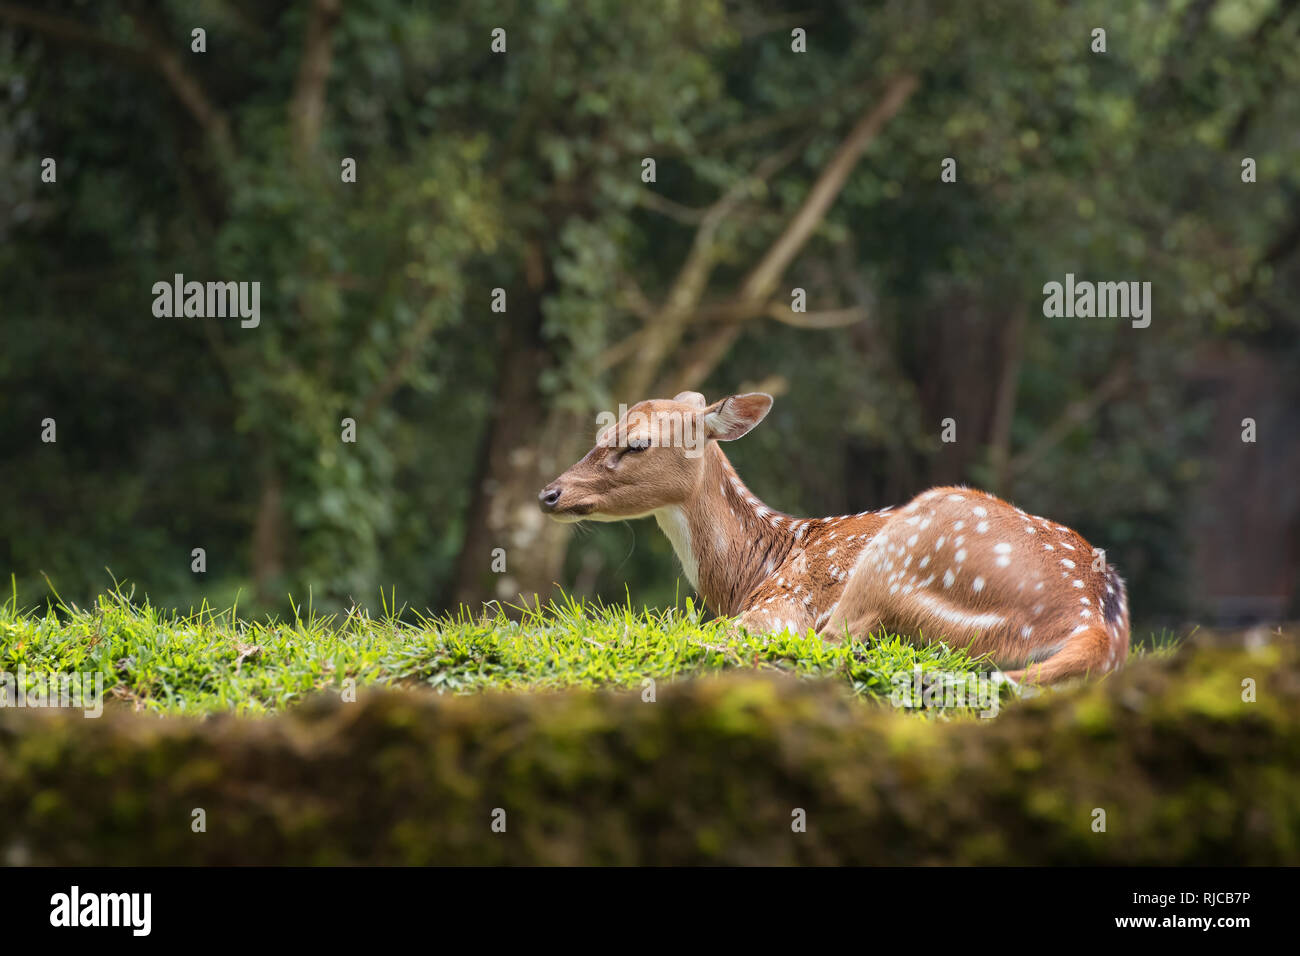 Spotted deer lying in forest, Indonesia Stock Photo